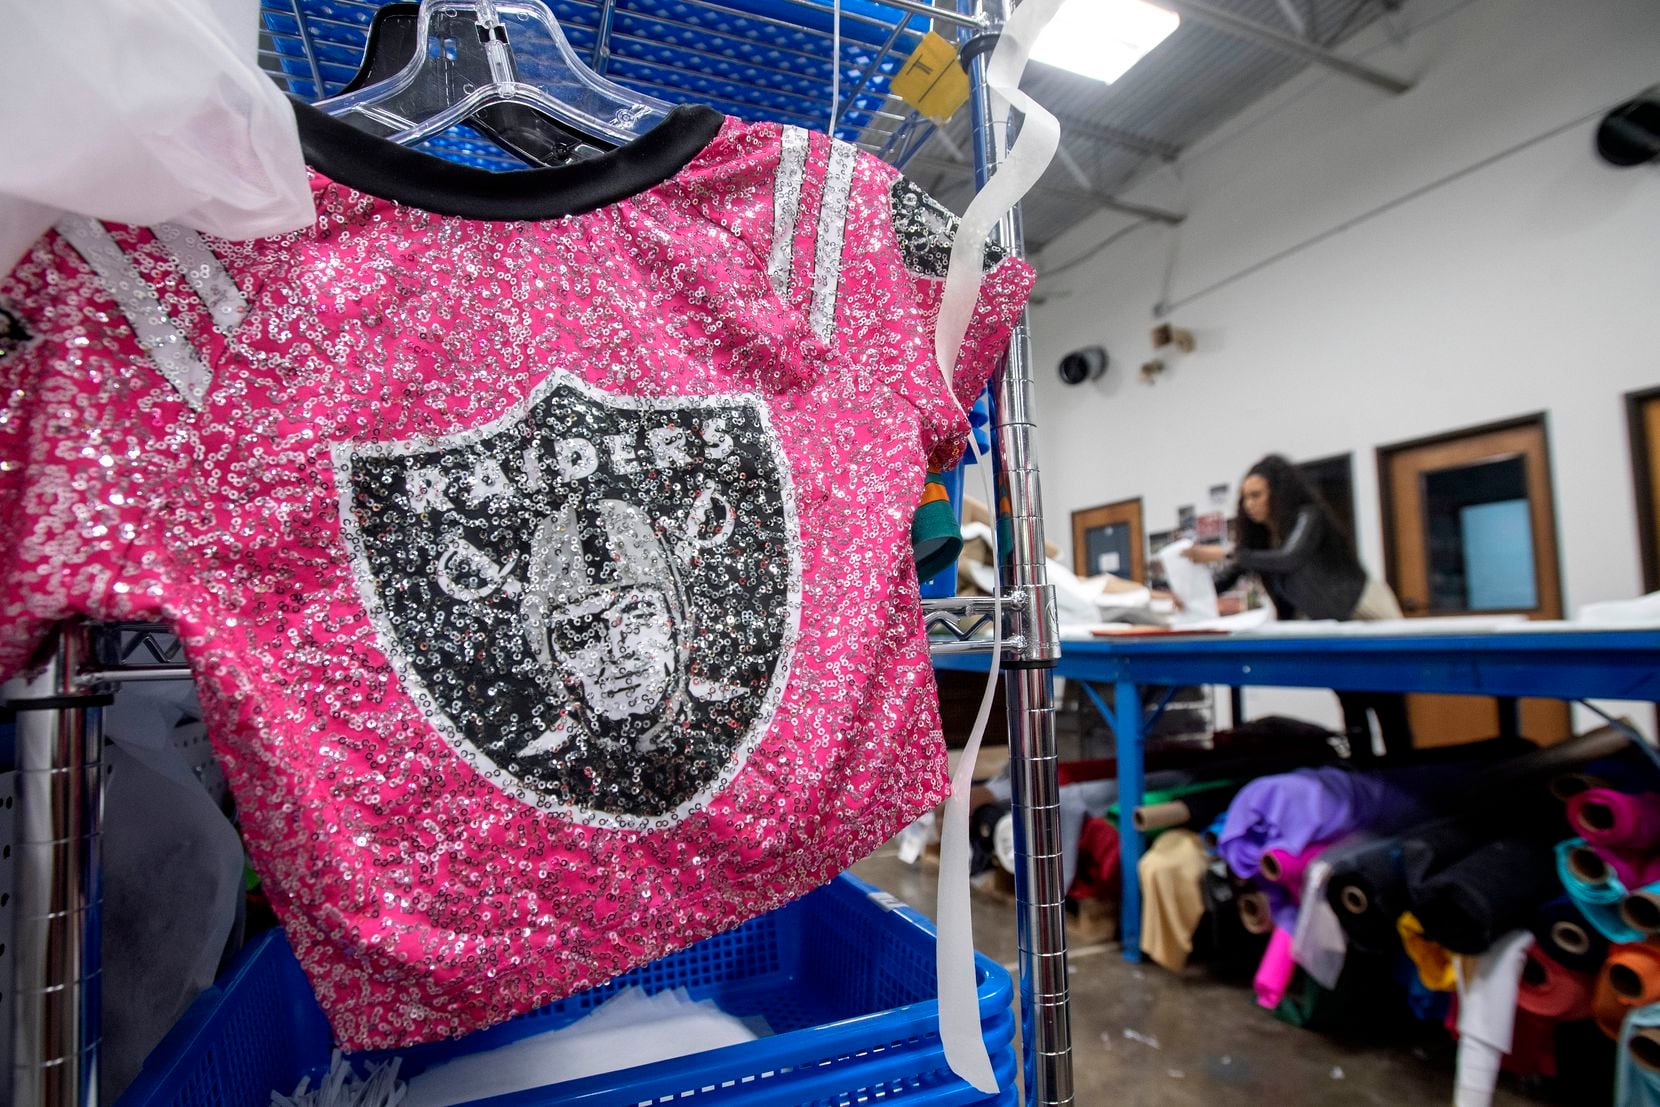 A sparkly cheerleader uniform hangs idly in the repurposed factory of Dallaswear as creative director Terra Saunders, a former Dallas Cowboys cheerleader, folds medical gowns in the background.